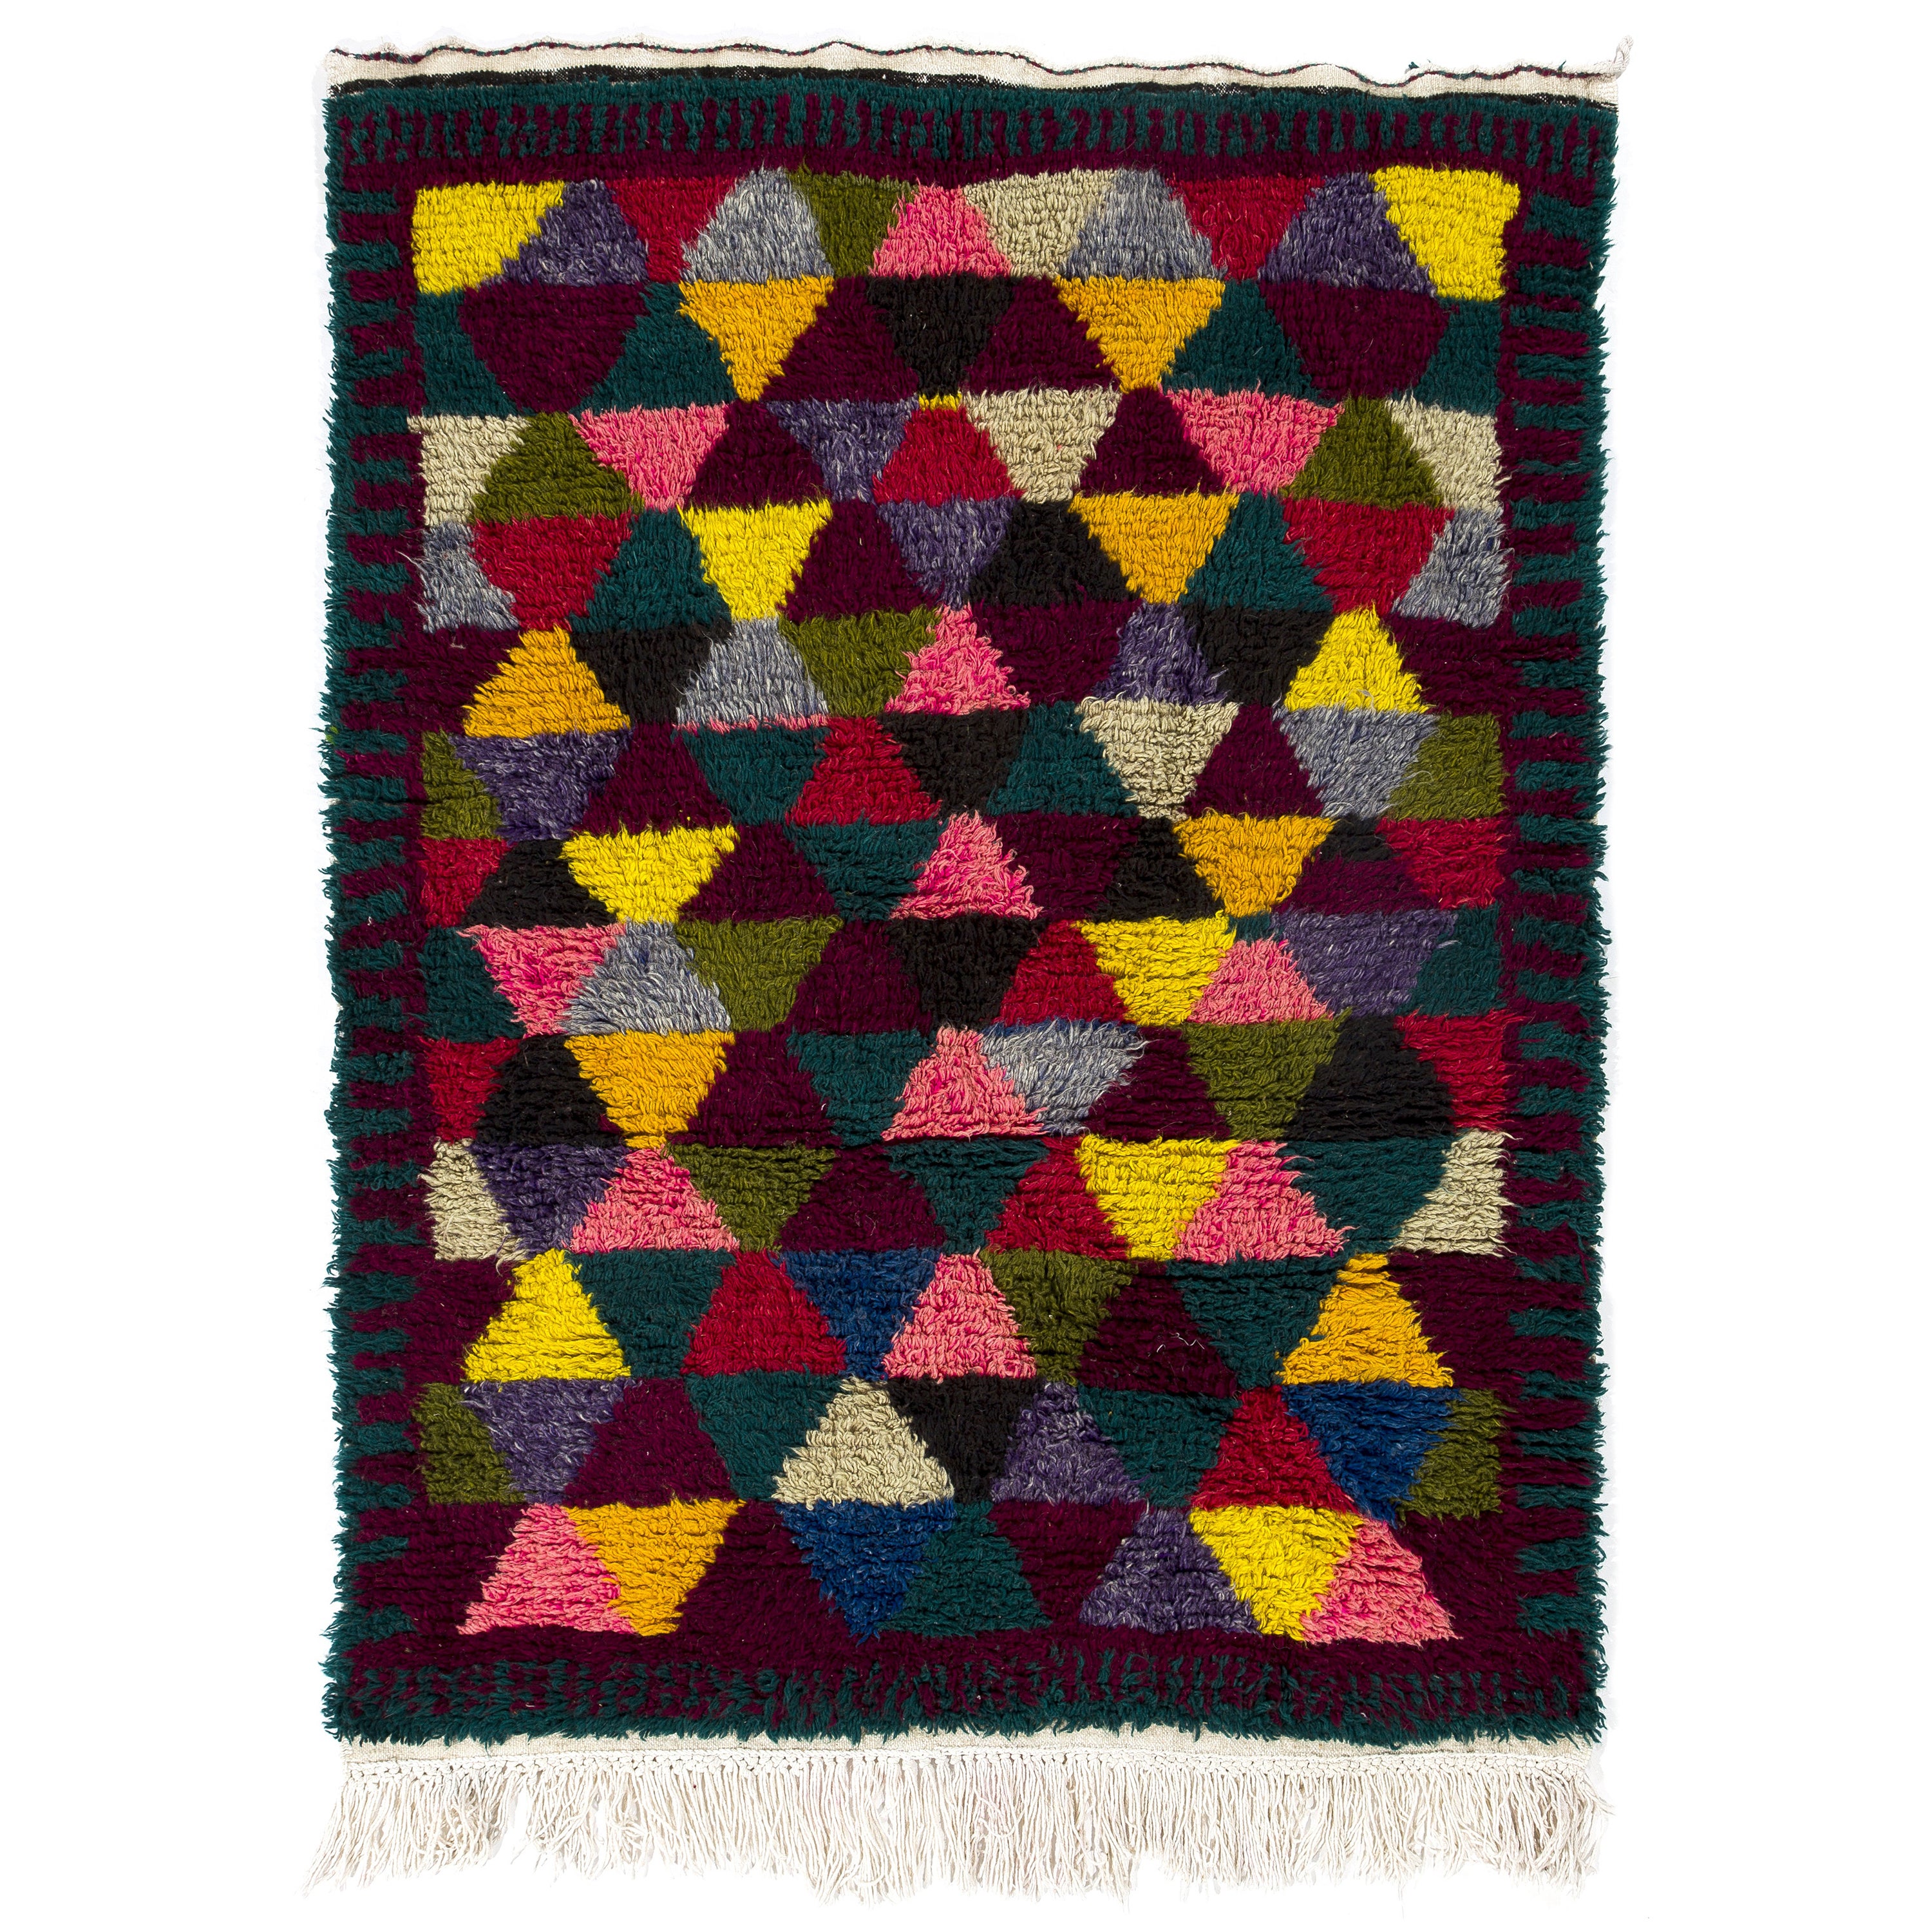 4.2x5.5 Ft Vibrant Handmade Tulu Rug. Soft Cozy Wool Pile. Vintage Wall Hanging For Sale